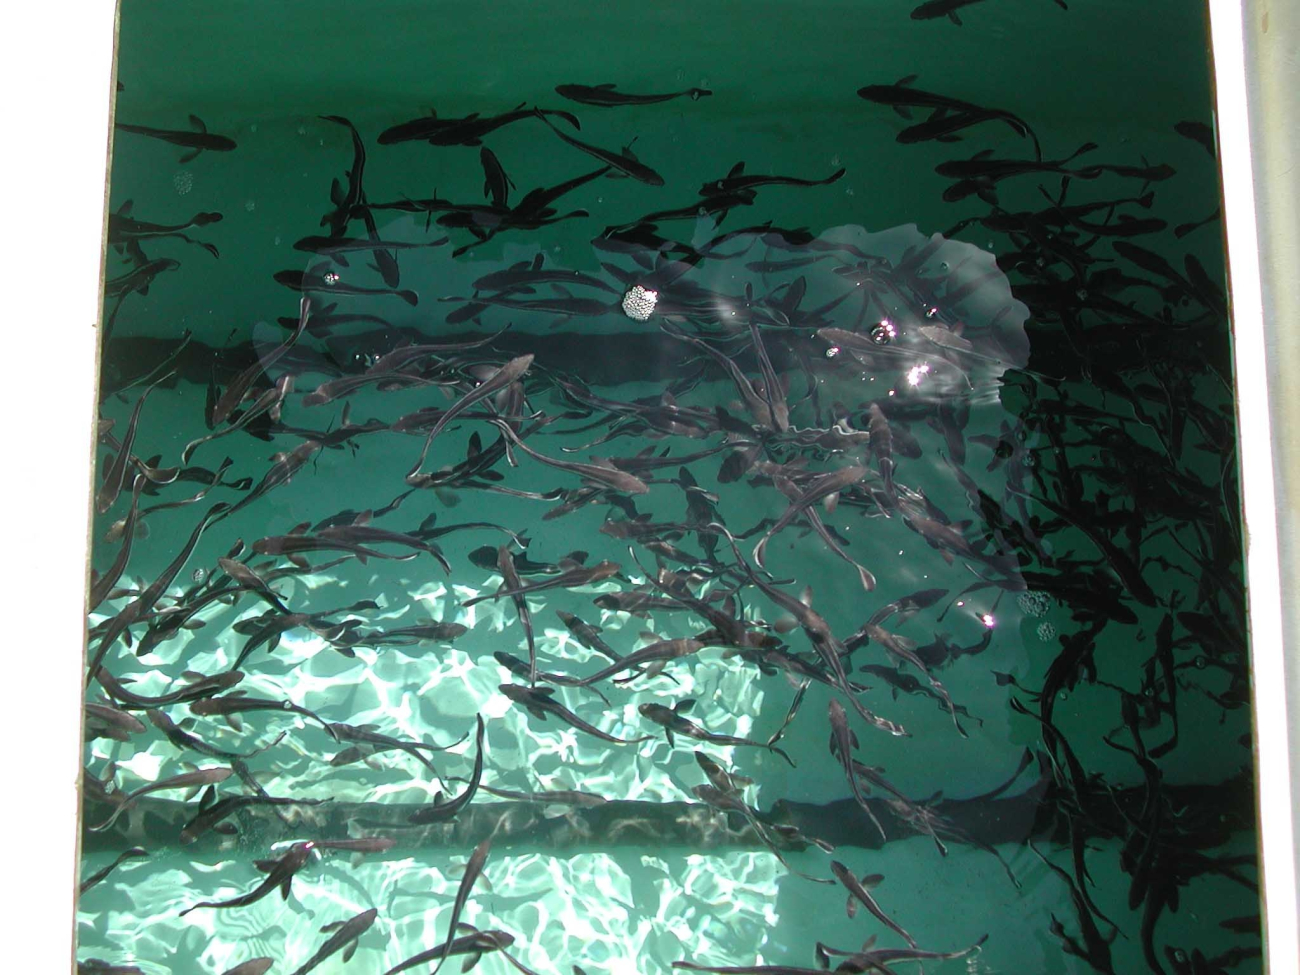 The first harvest of cultured cobia at the Florida research laboratory